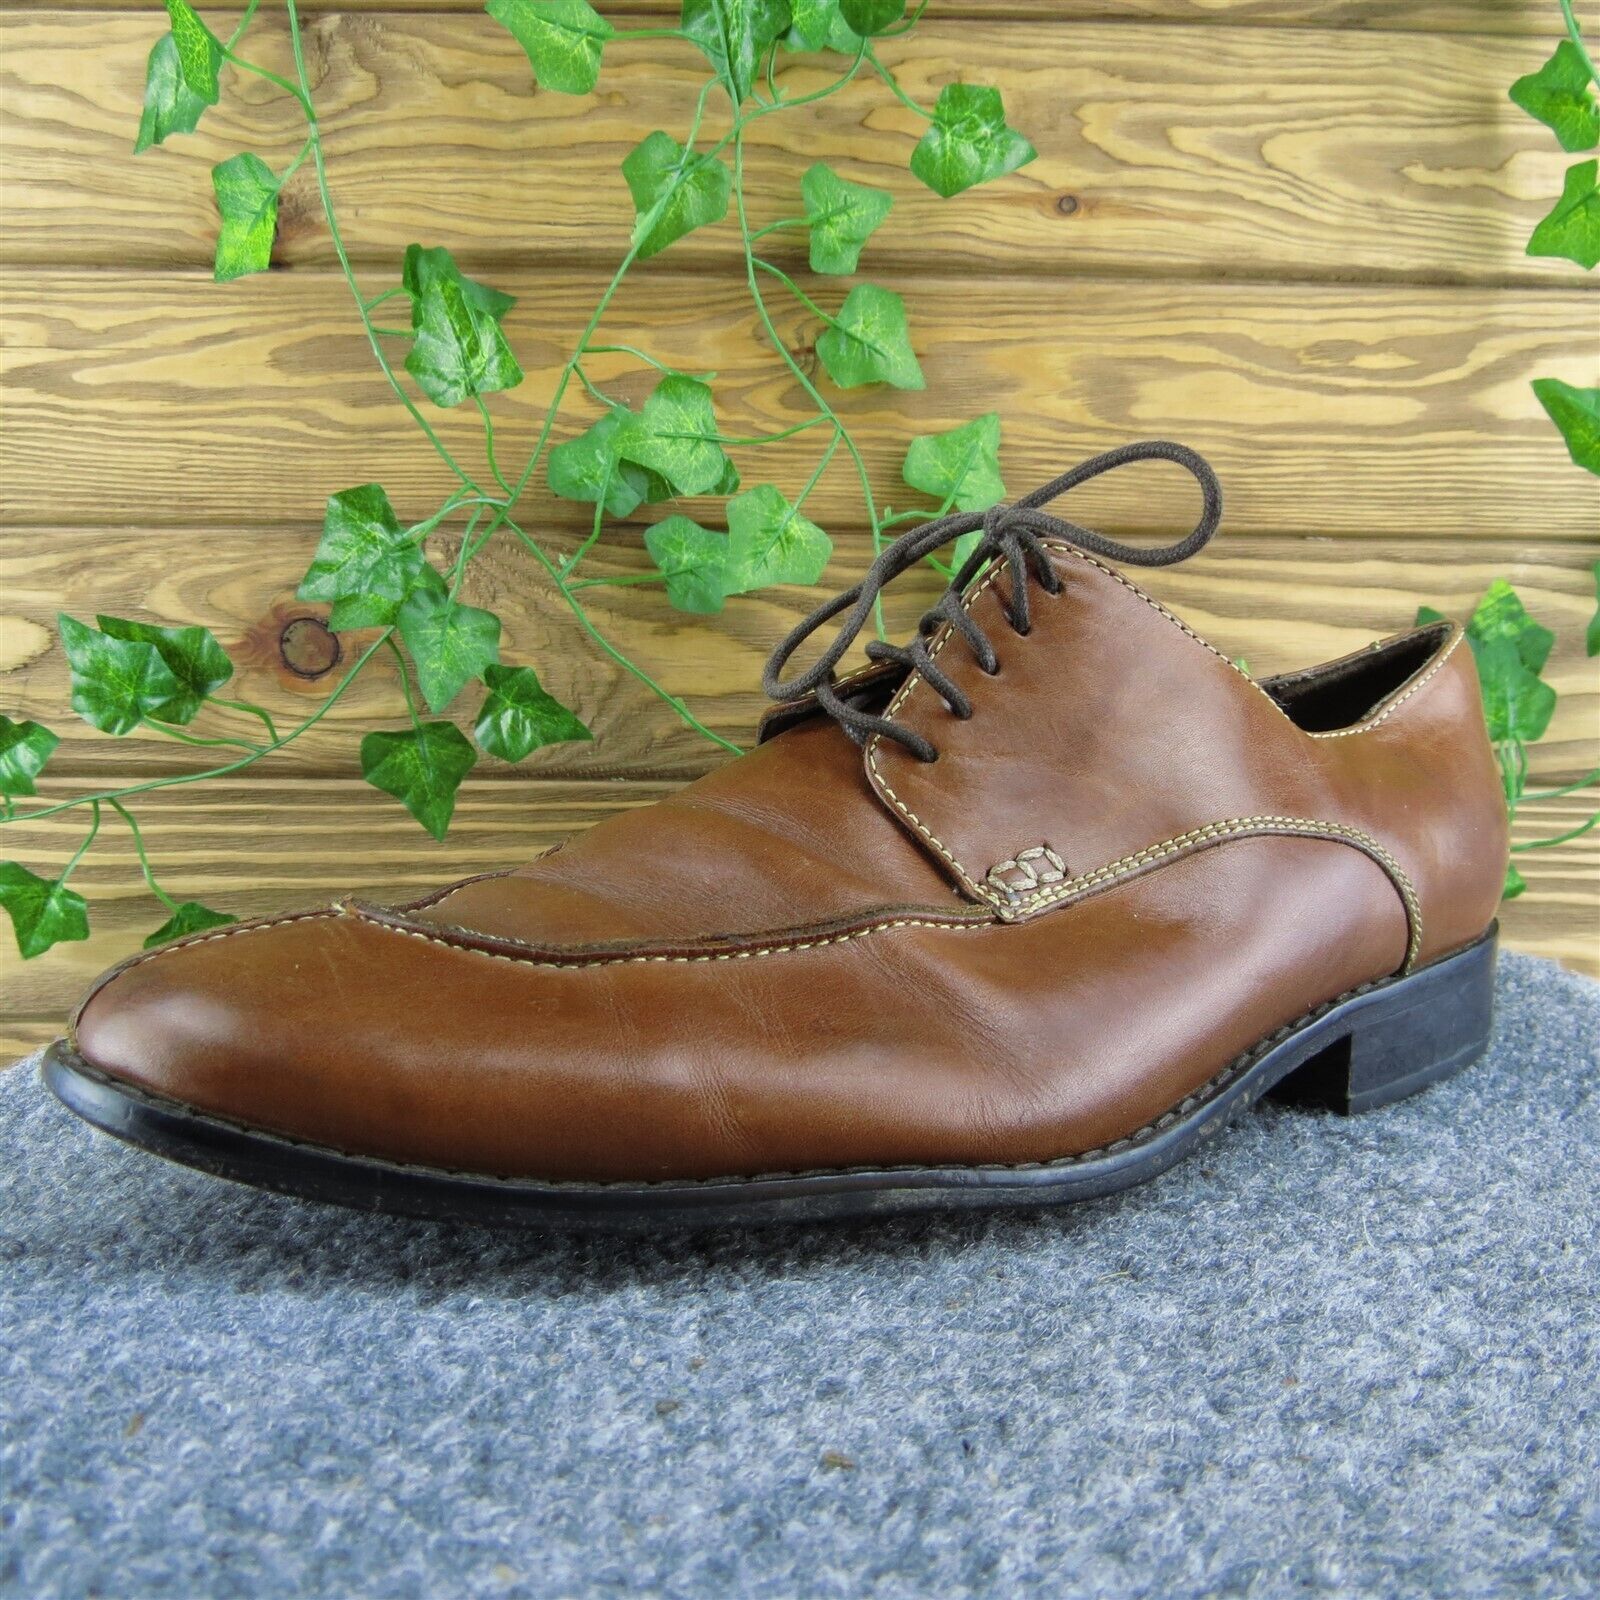 Primary image for Cole Haan C08189 Men Derby Oxfords Shoes Brown Leather Lace Up Size 10.5 Medium